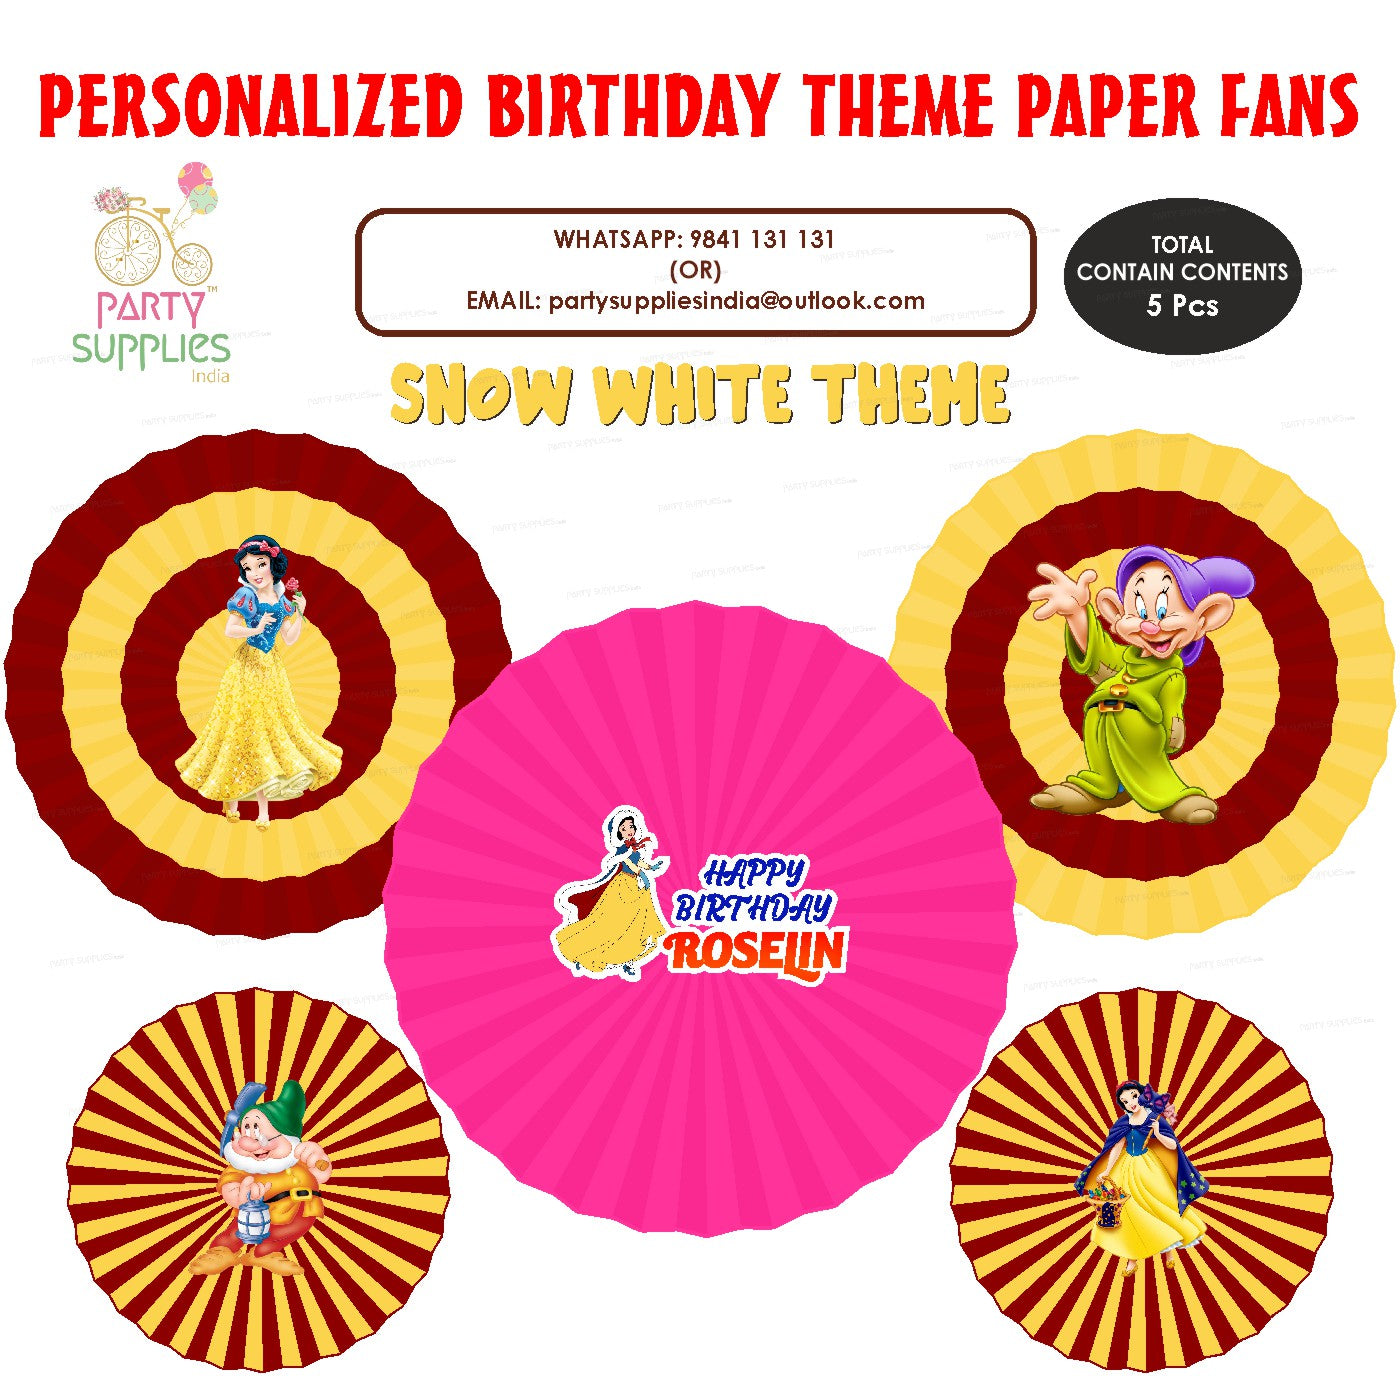 PSI Snow And White Theme Paper Fan